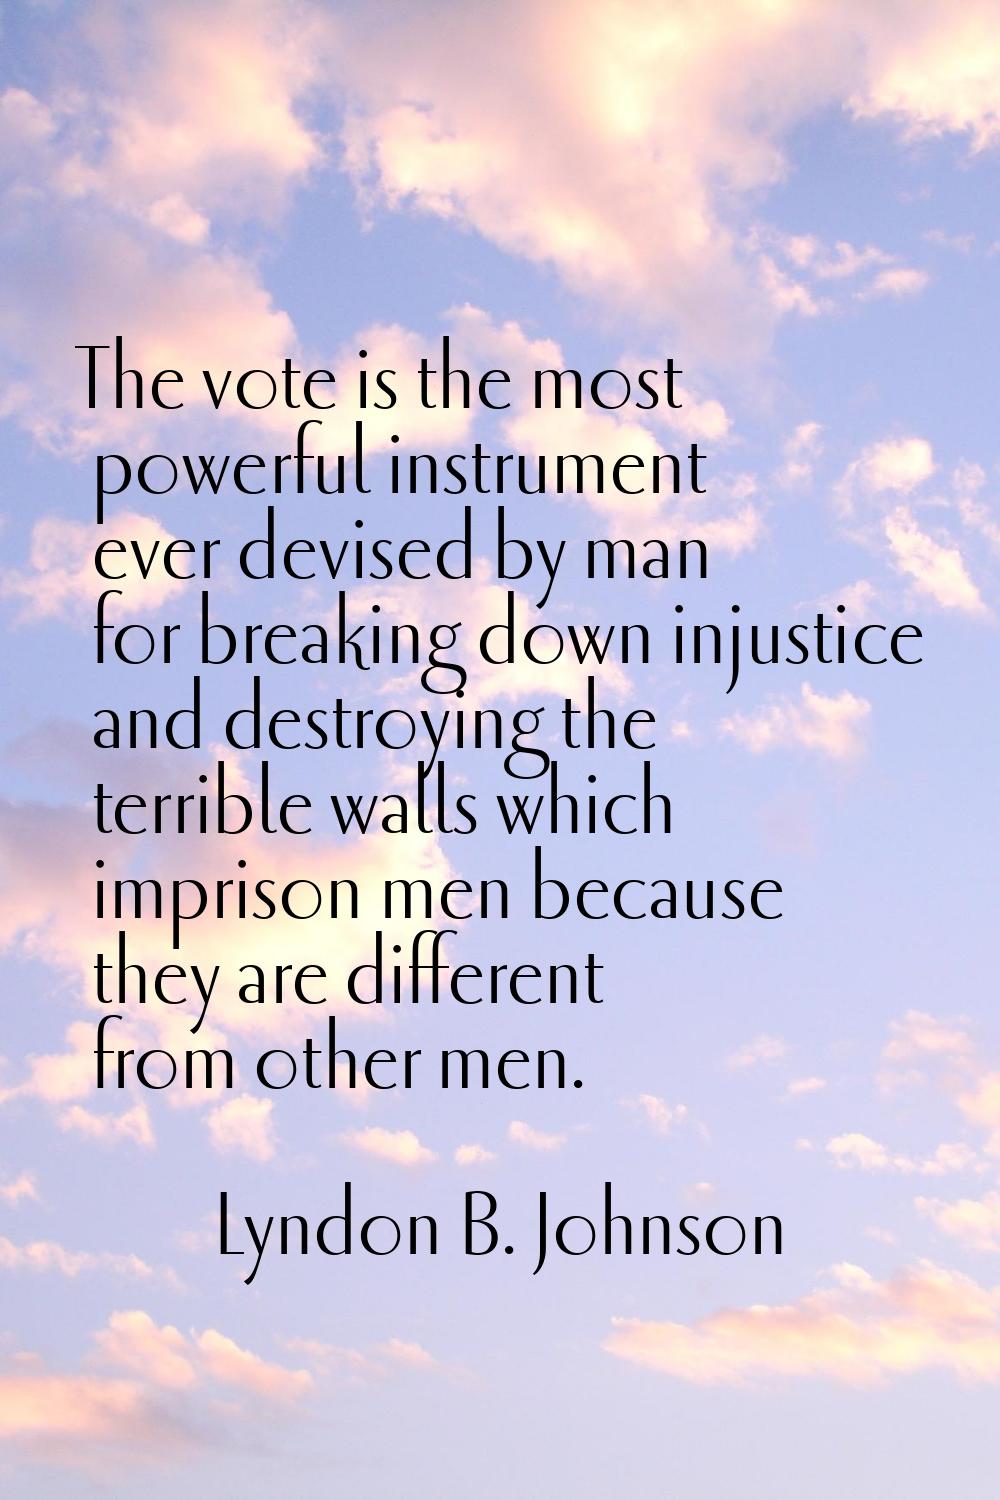 The vote is the most powerful instrument ever devised by man for breaking down injustice and destro